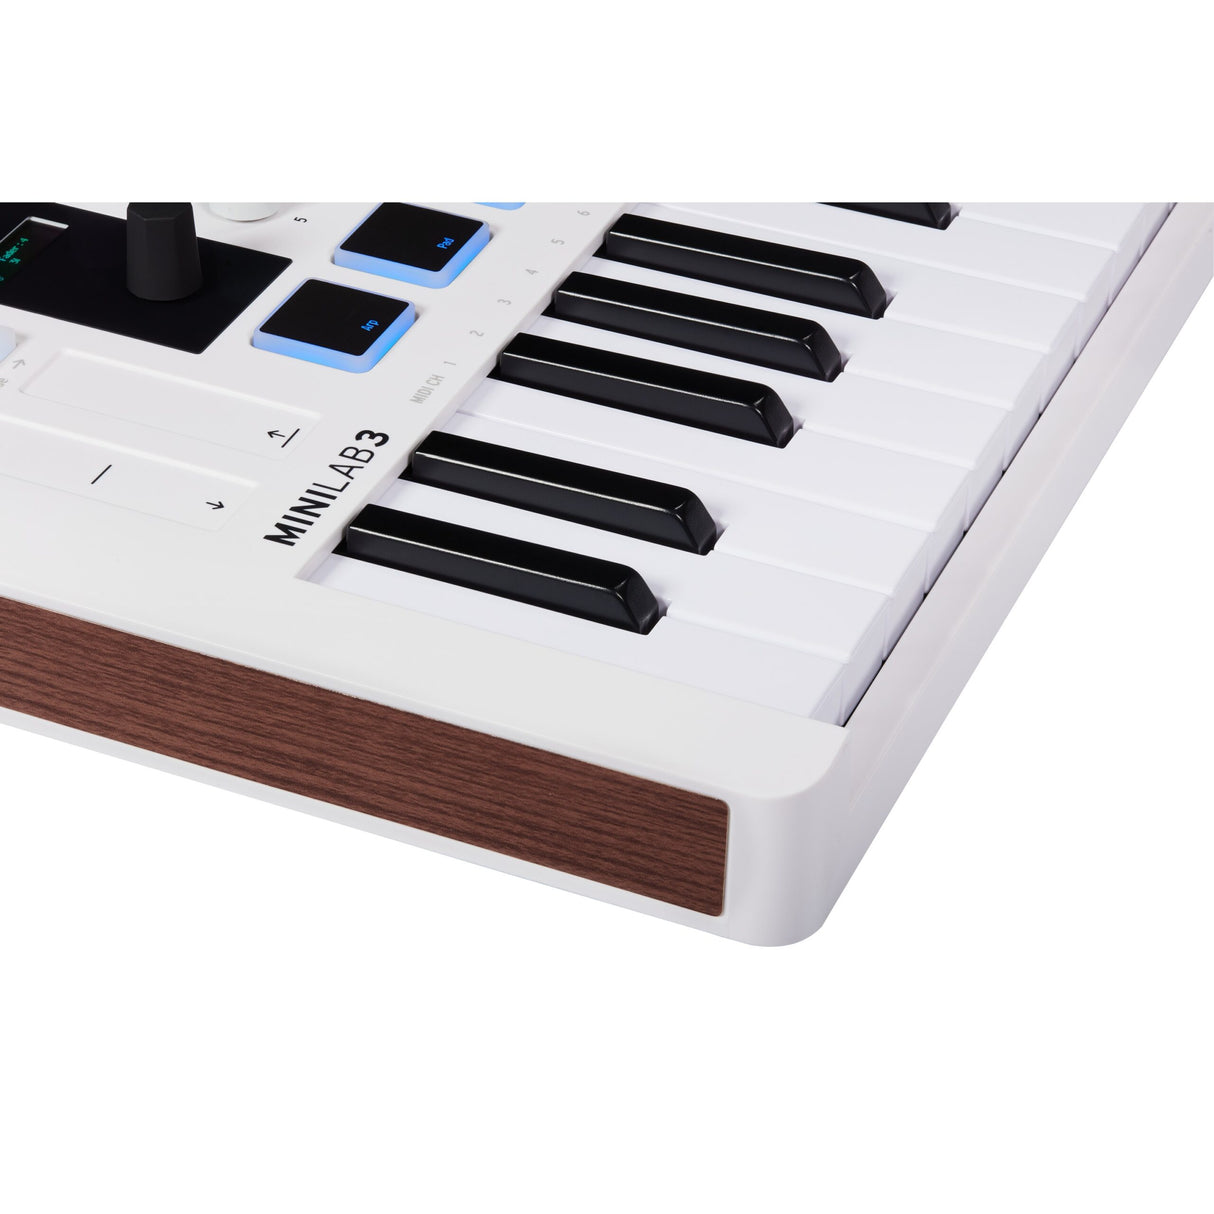 Arturia MiniLab 3 25-Note Compact MIDI Keyboard and Pad Controller, White (Used)